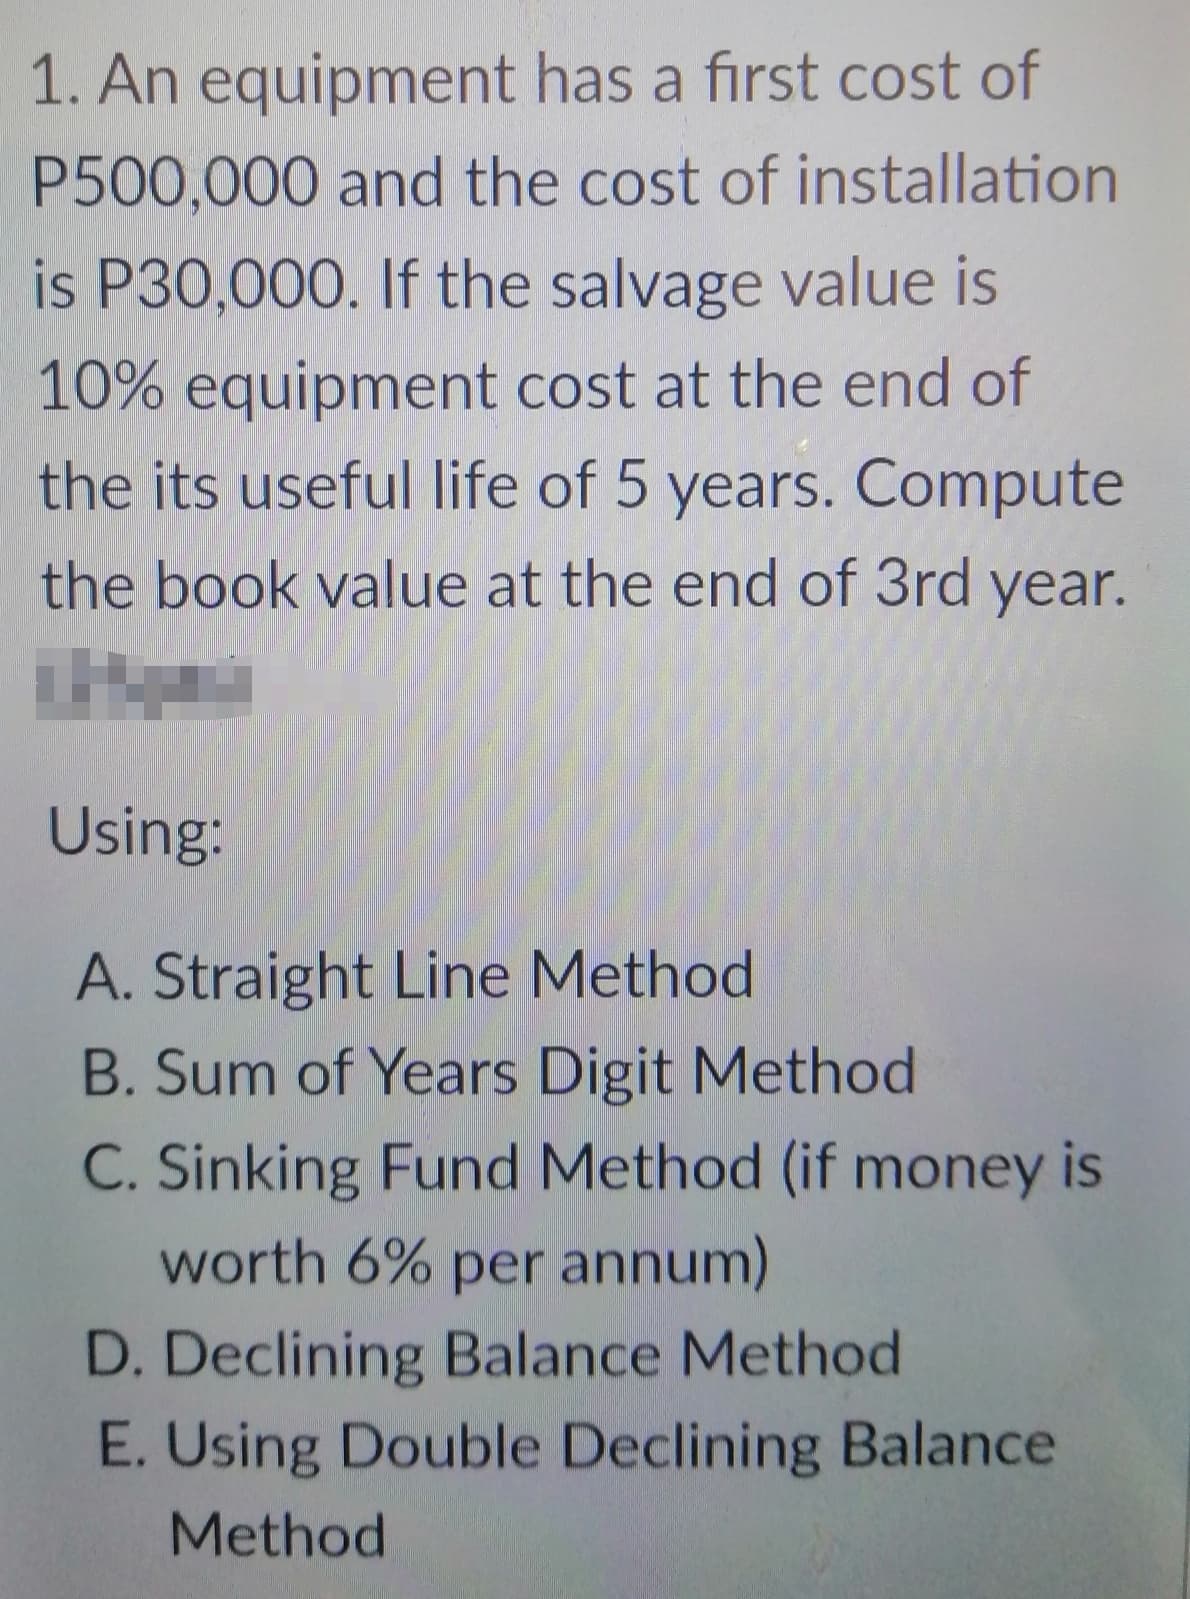 1. An equipment has a first cost of
P500,000 and the cost of installation
is P30,000. If the salvage value is
10% equipment cost at the end of
the its useful life of 5 years. Compute
the book value at the end of 3rd year.
Using:
A. Straight Line Method
B. Sum of Years Digit Method
C. Sinking Fund Method (if money is
worth 6% per annum)
D. Declining Balance Method
E. Using Double Declining Balance
Method
